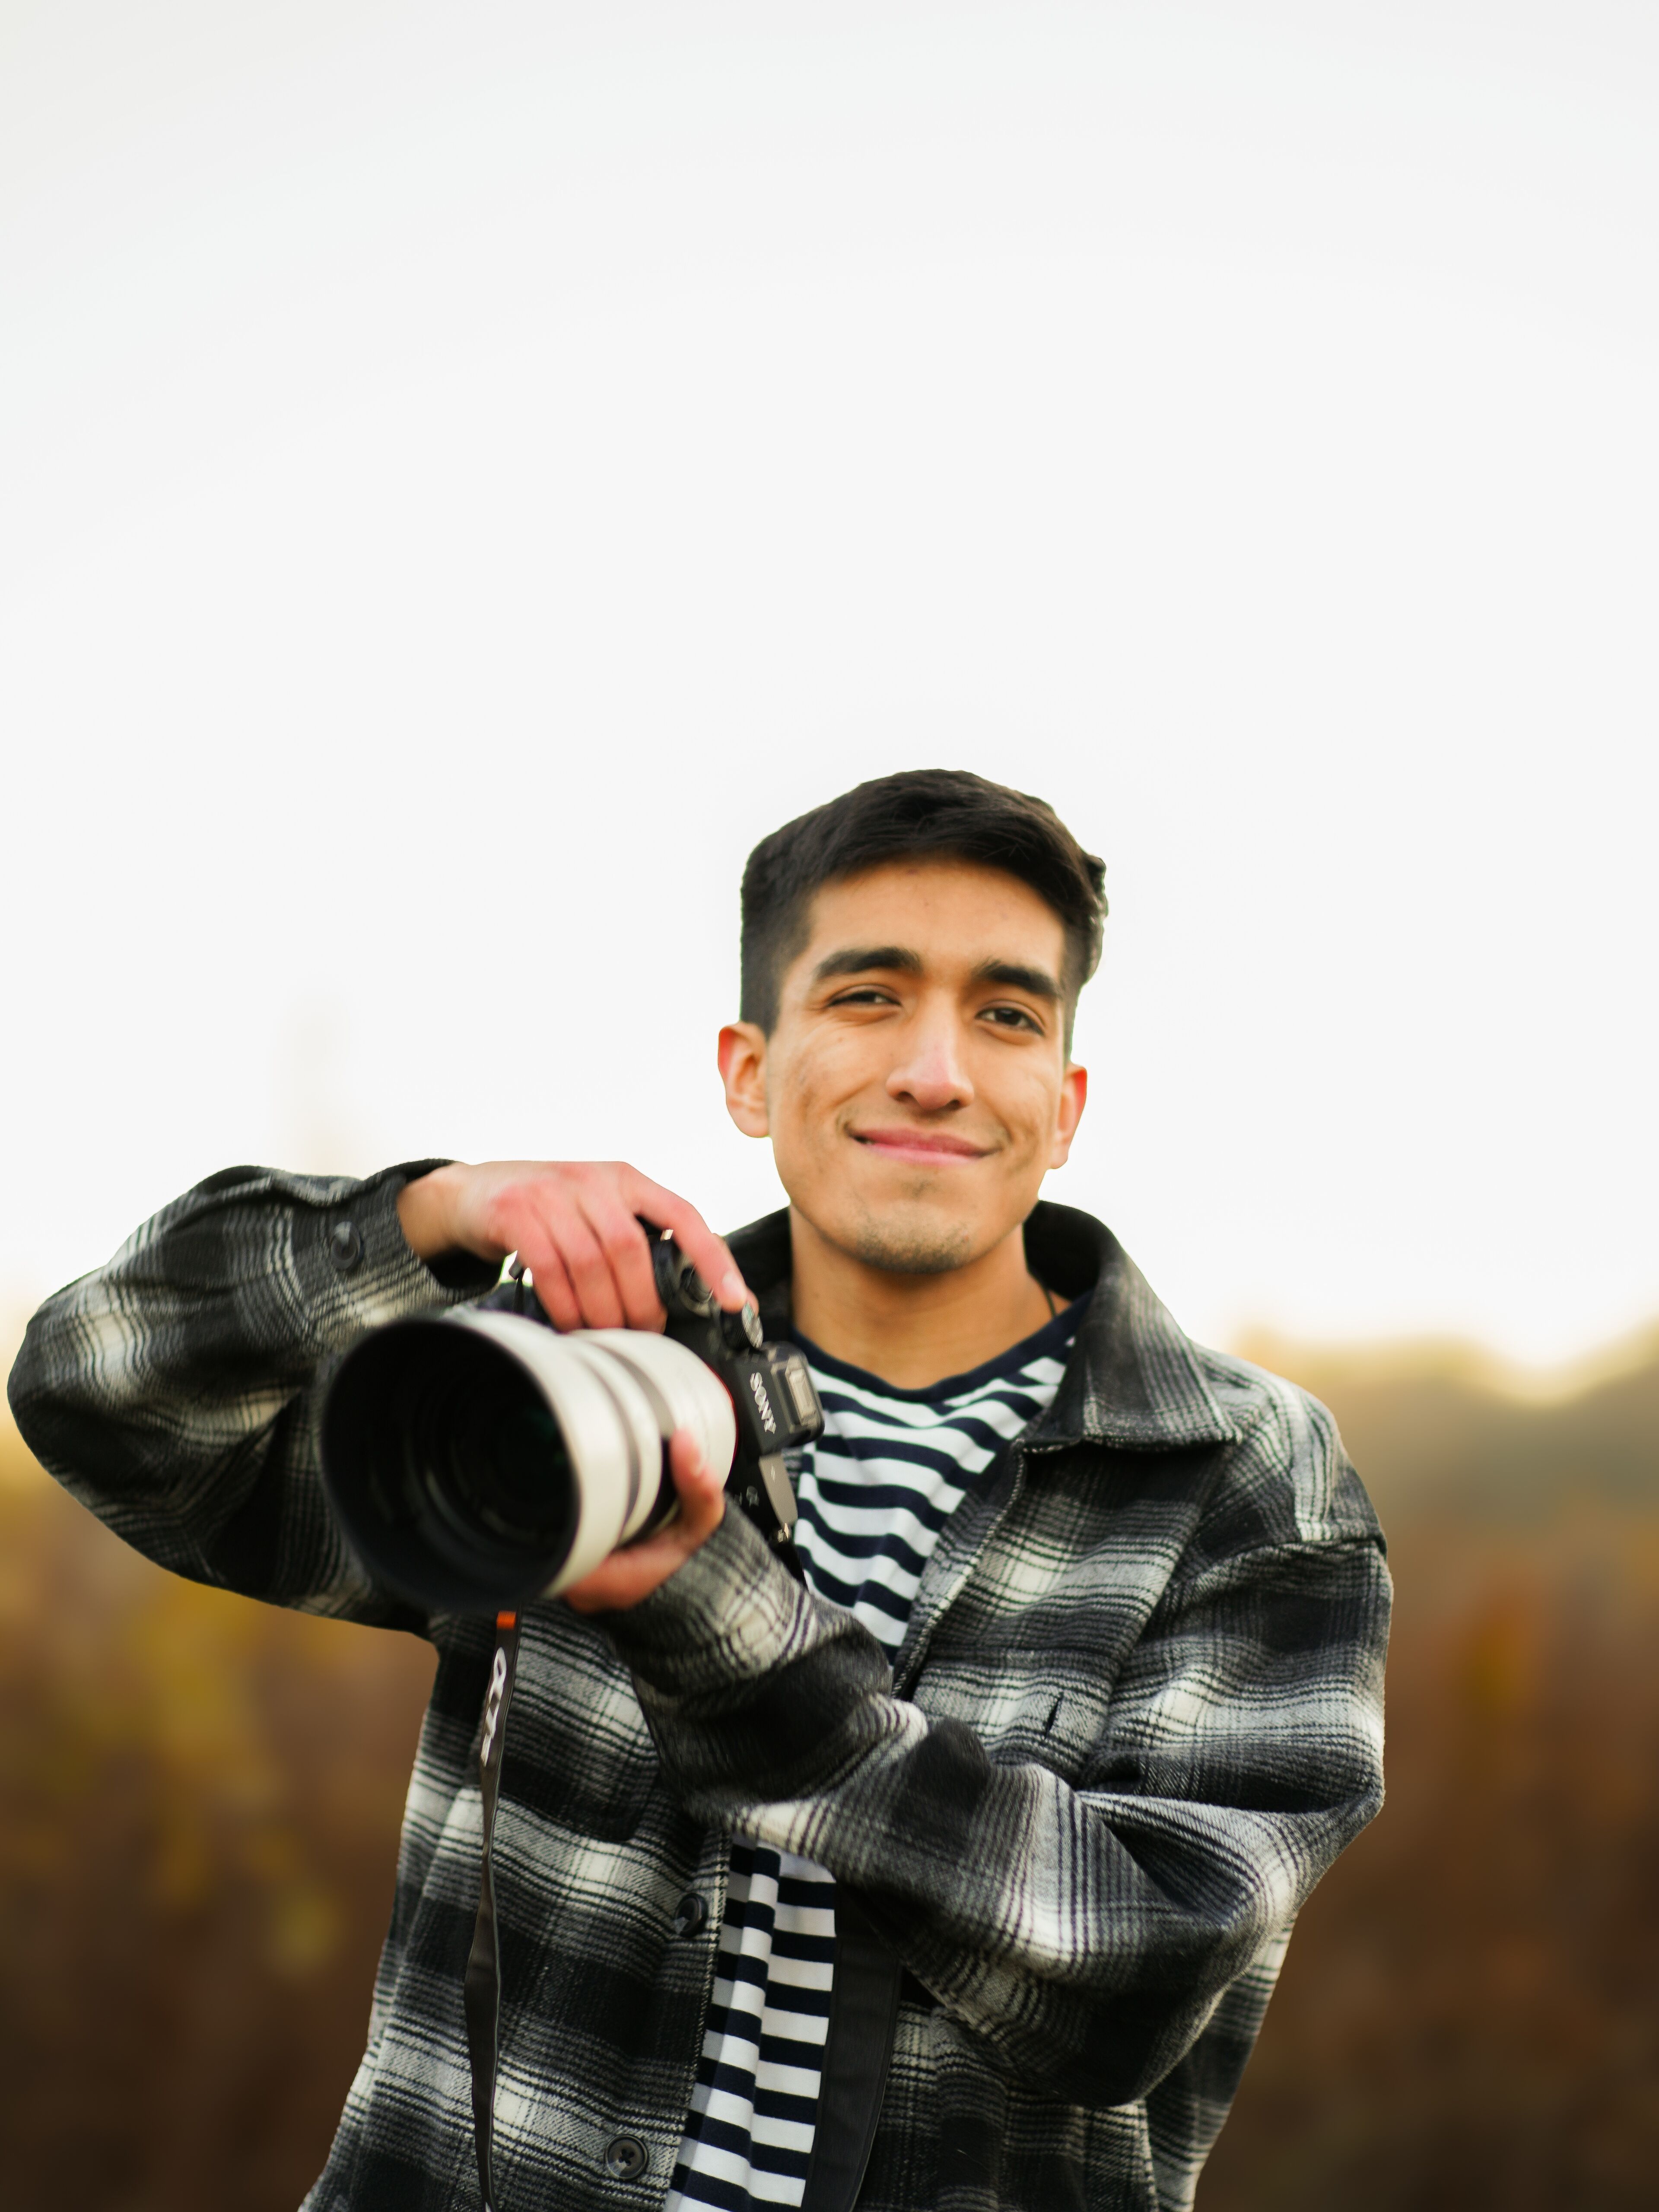 A cheerful young man holding a professional camera in an autumnal outdoor setting.